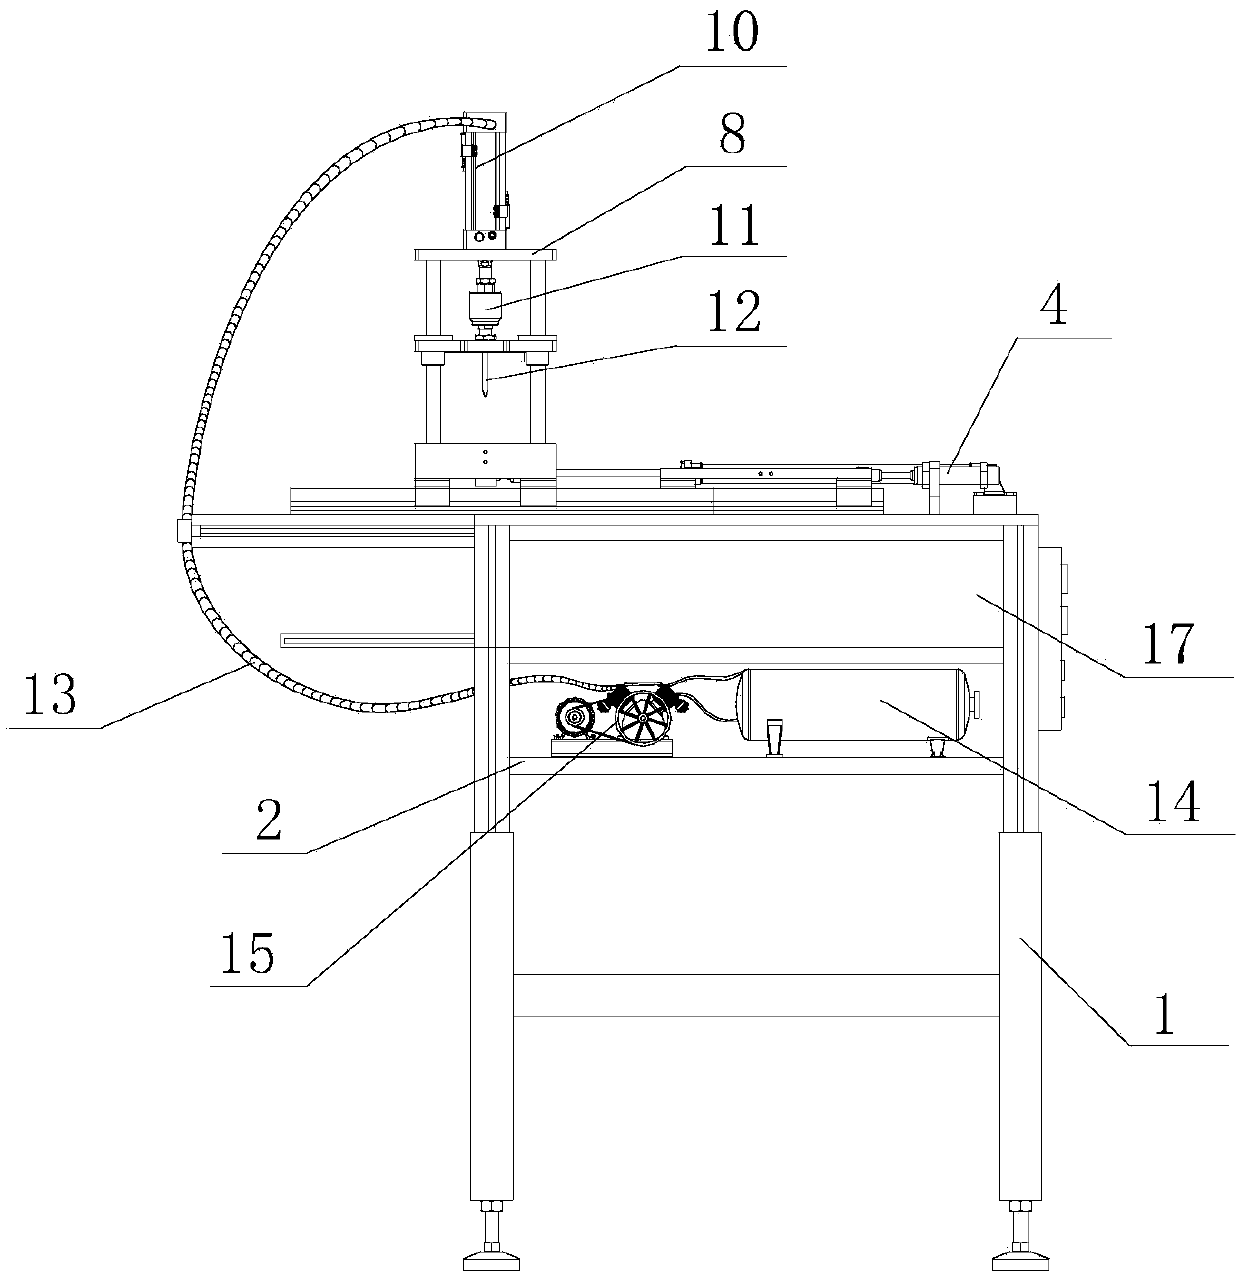 Ginseng slicing device with high safety